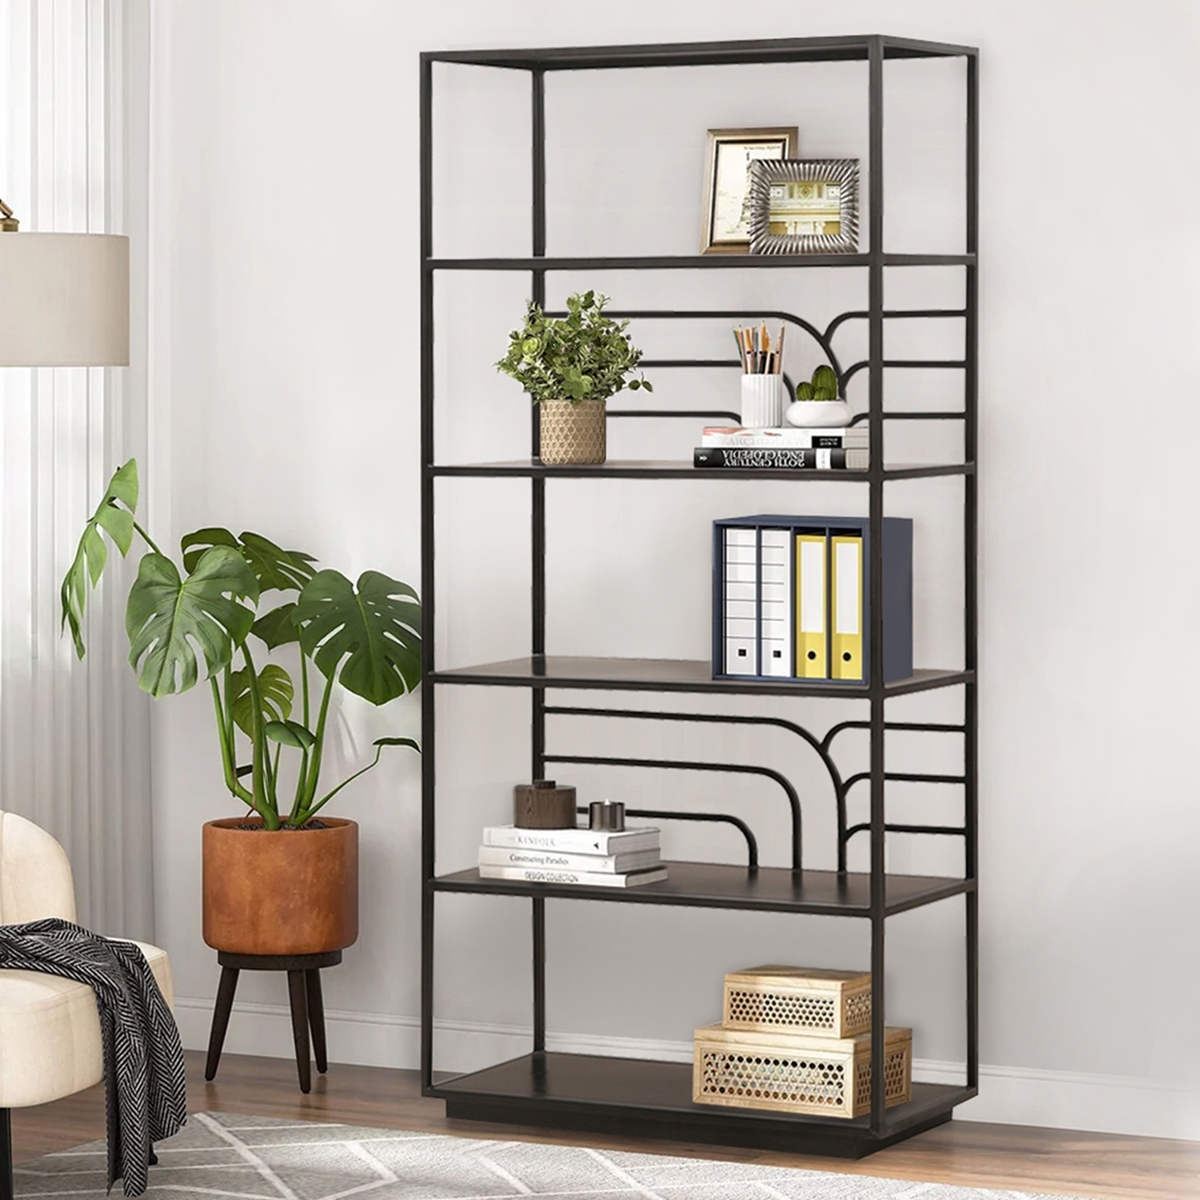 Taft Industrial Metal Frame 5-Tier Open Bookcase for Home Office